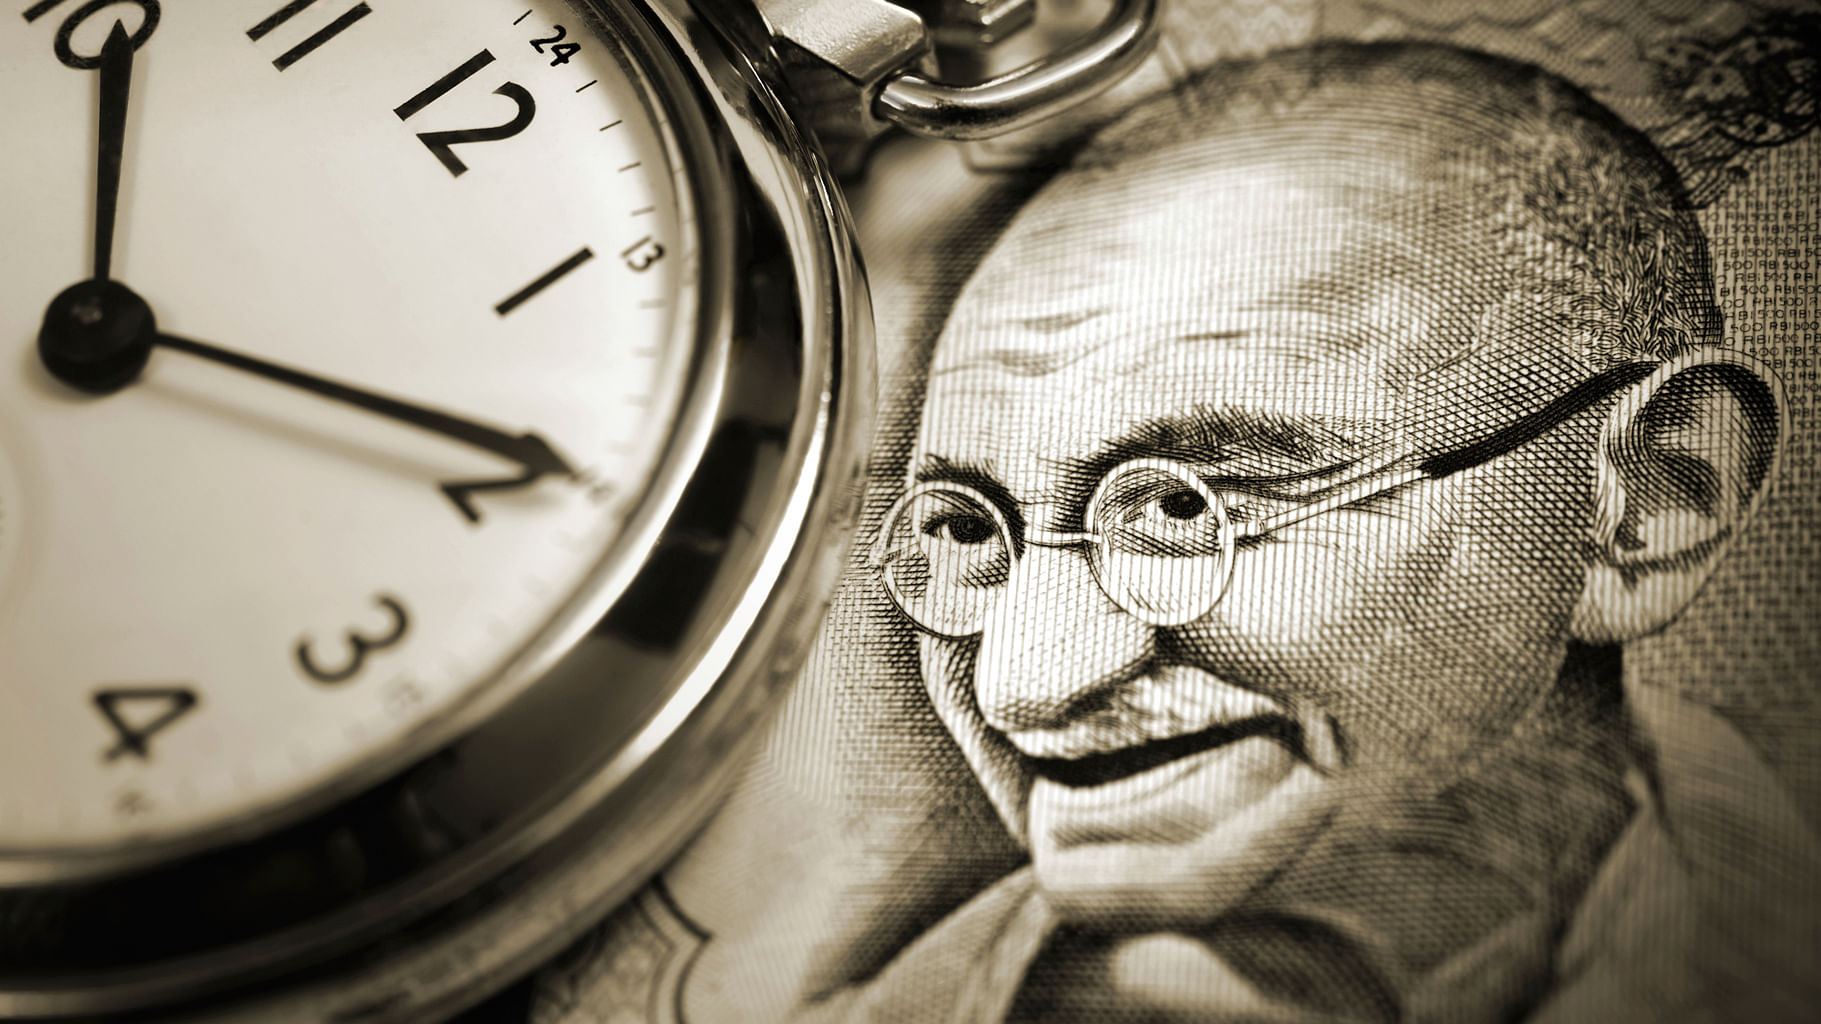 The Watch - An instrument for regulating life | Gandhi's inspiring short  stories | Students' Projects